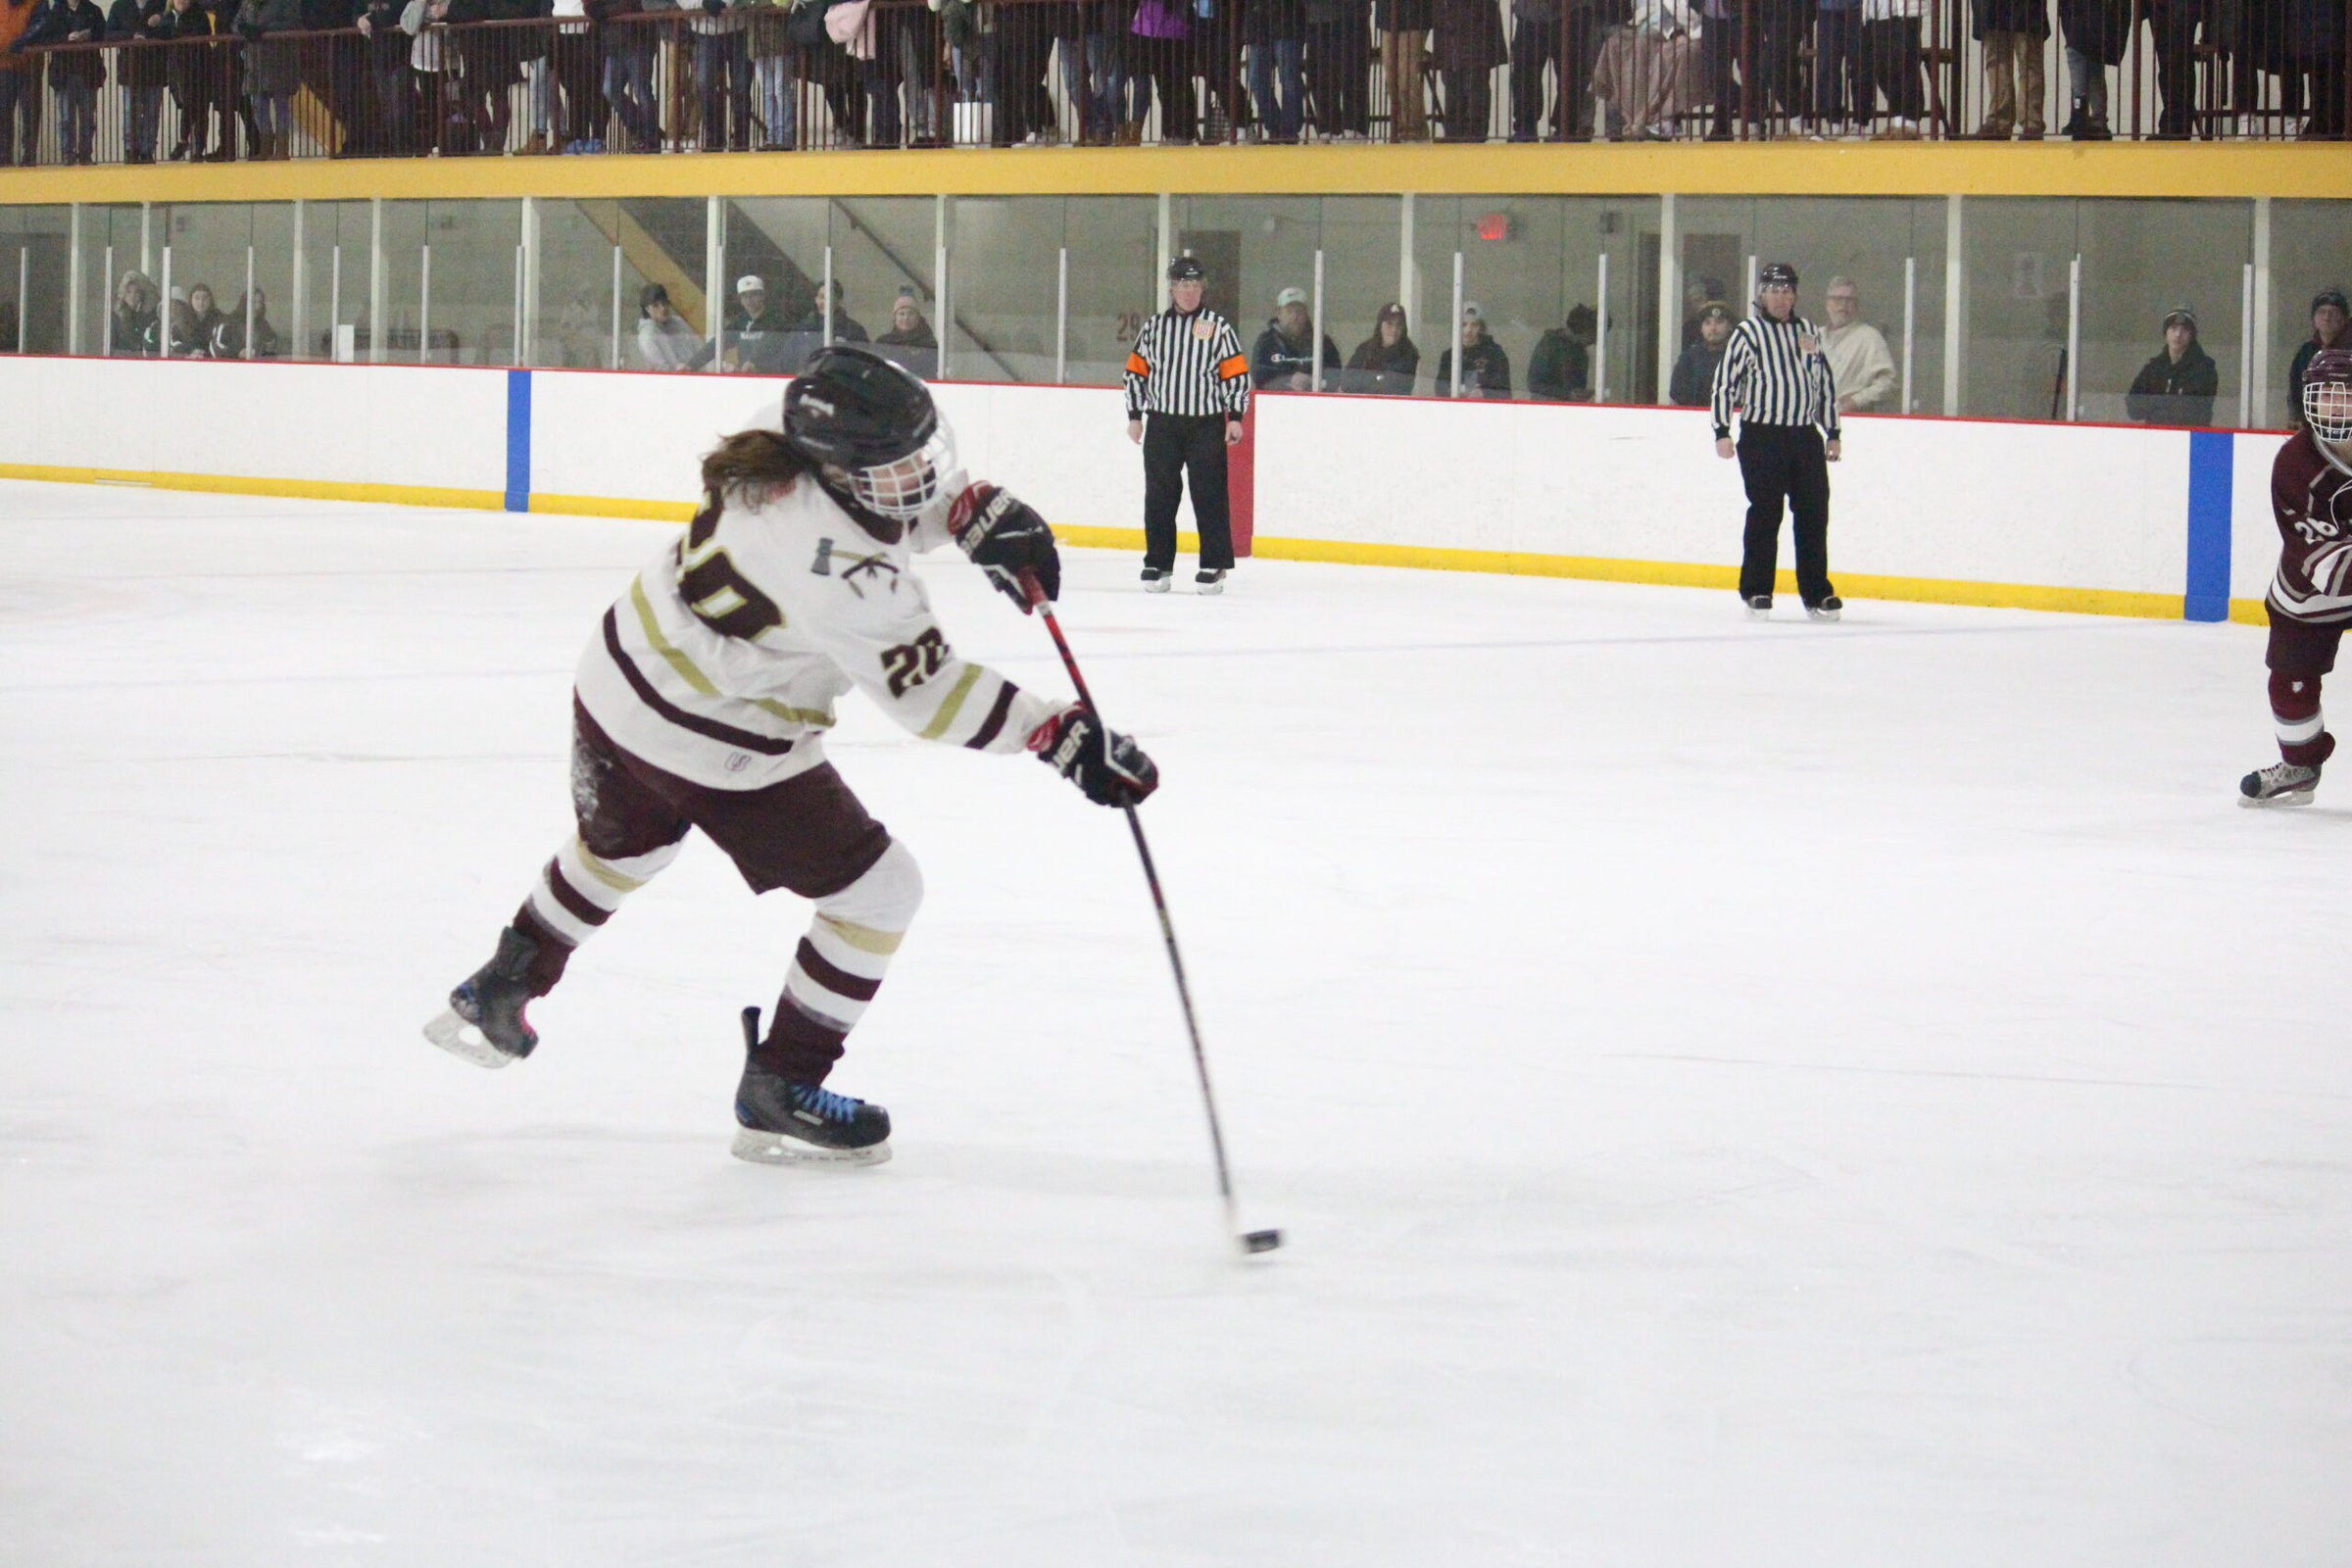 Attack of the Titans: Offense powers Algonquin girls hockey to playoff win over Dedham